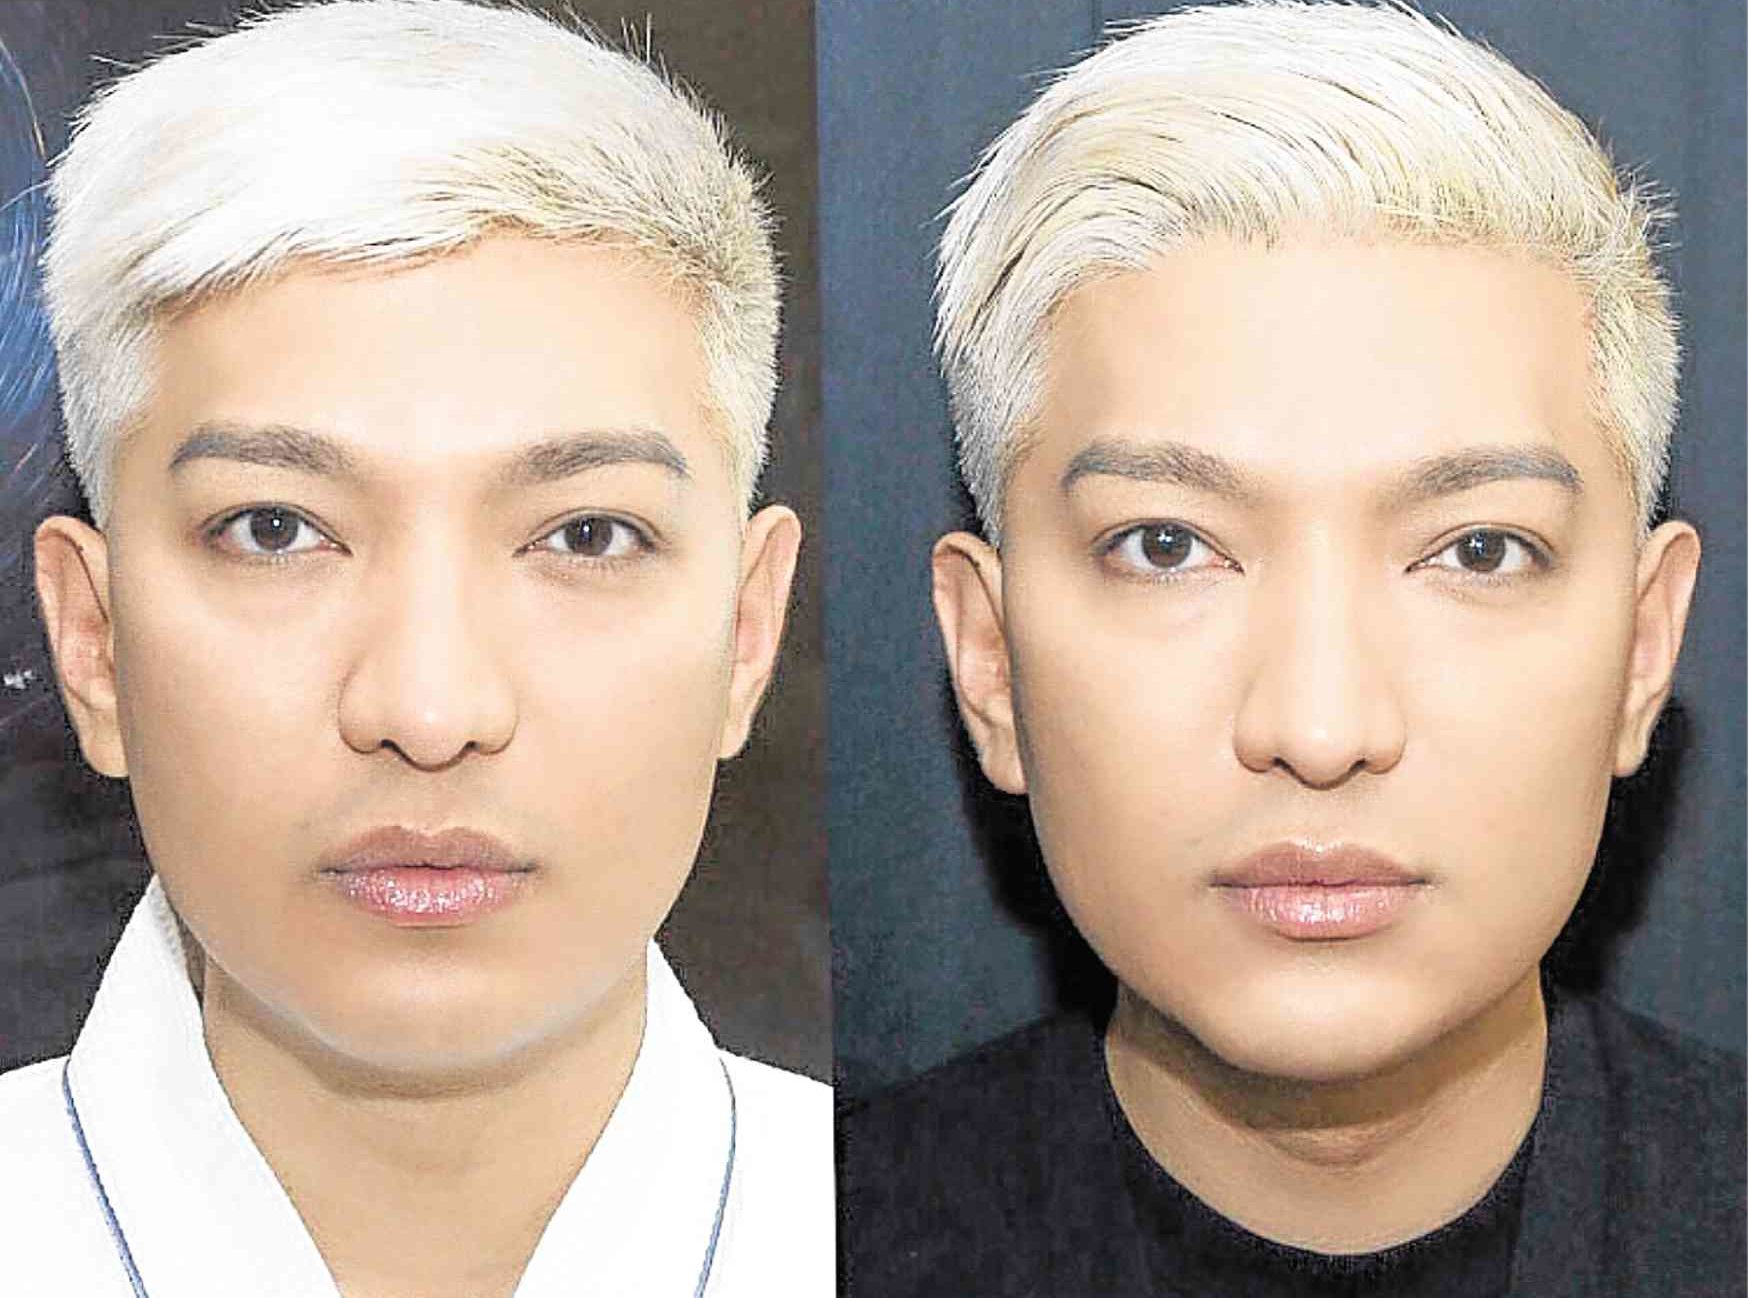 Bryanboy: 'I have never met a hater who is beautiful